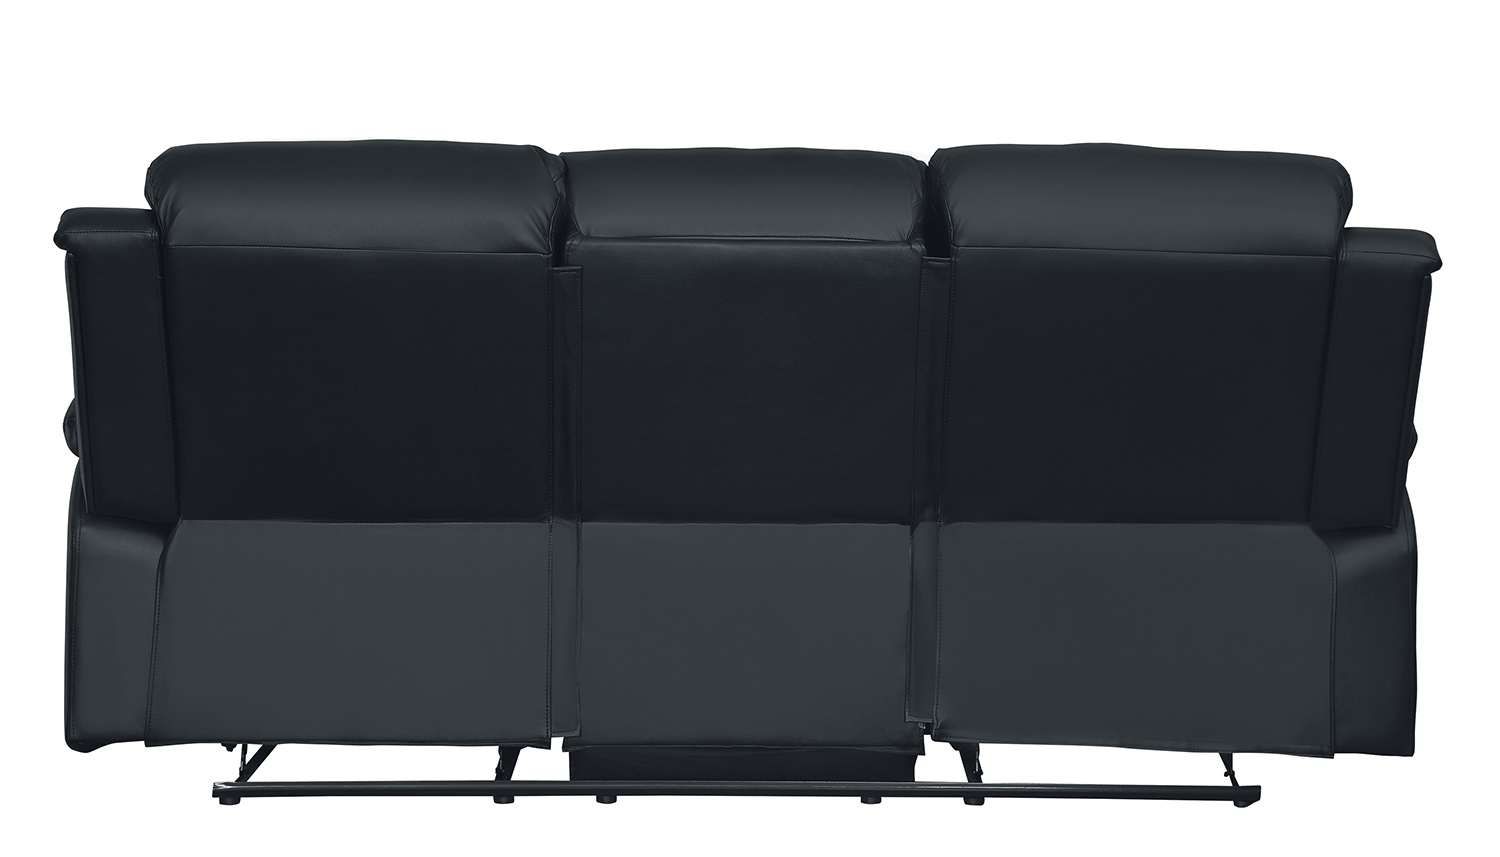 Homelegance Clarkdale Double Reclining Sofa With Center Drop-Down Cup Holders - Black